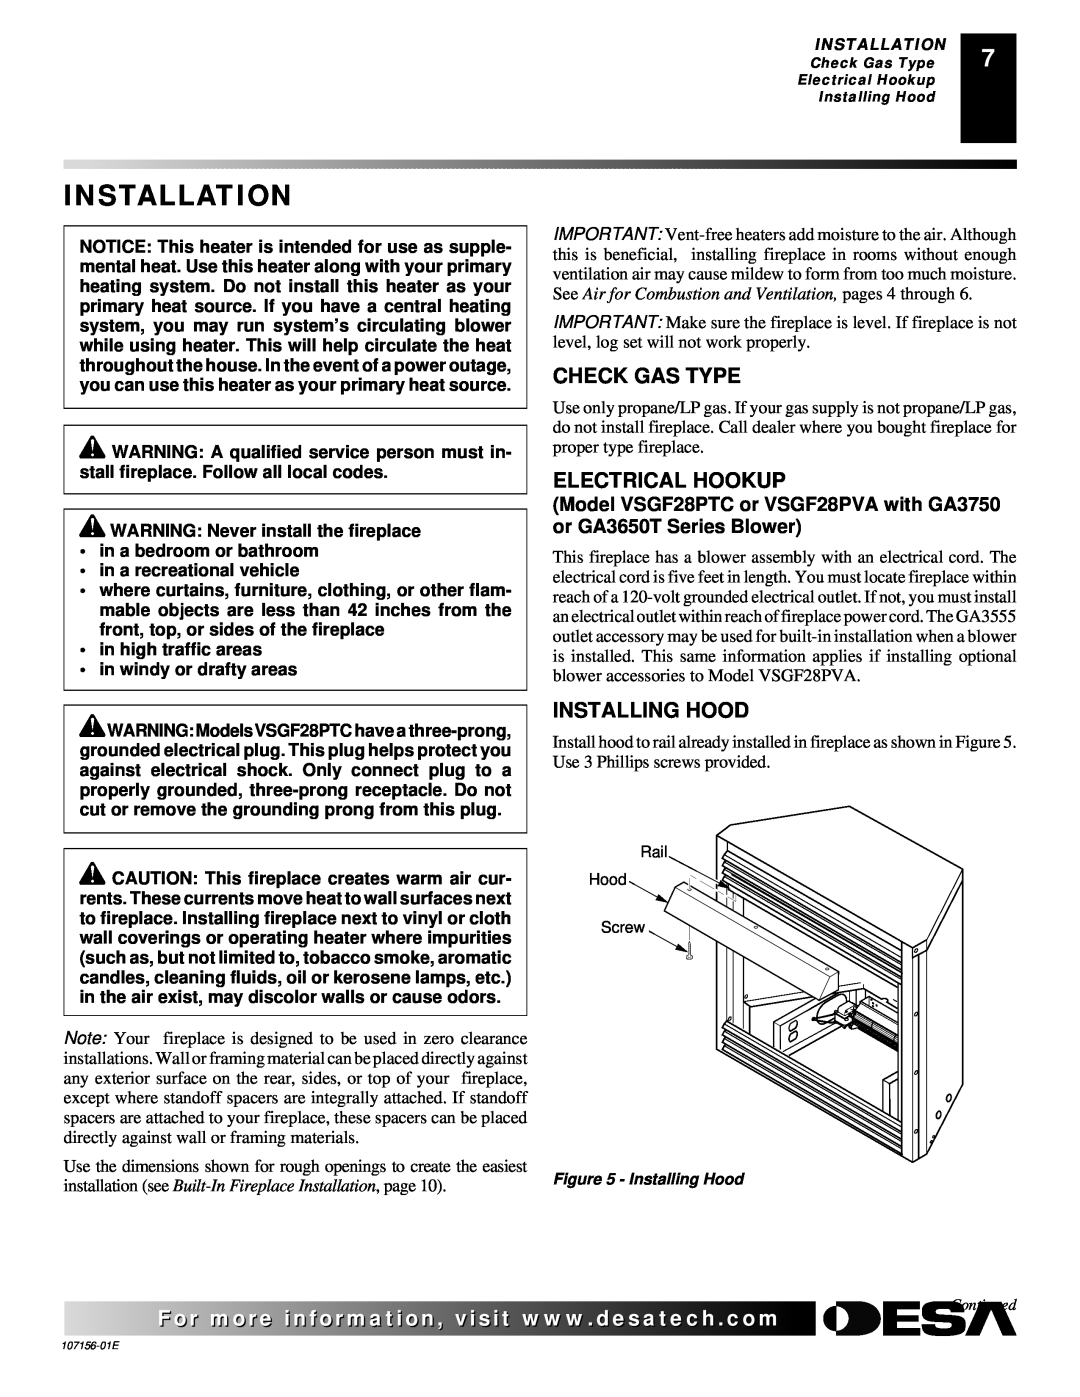 Vanguard Heating 107156-01E.pdf Installation, Check Gas Type, Electrical Hookup, Installing Hood, For more, visit www 